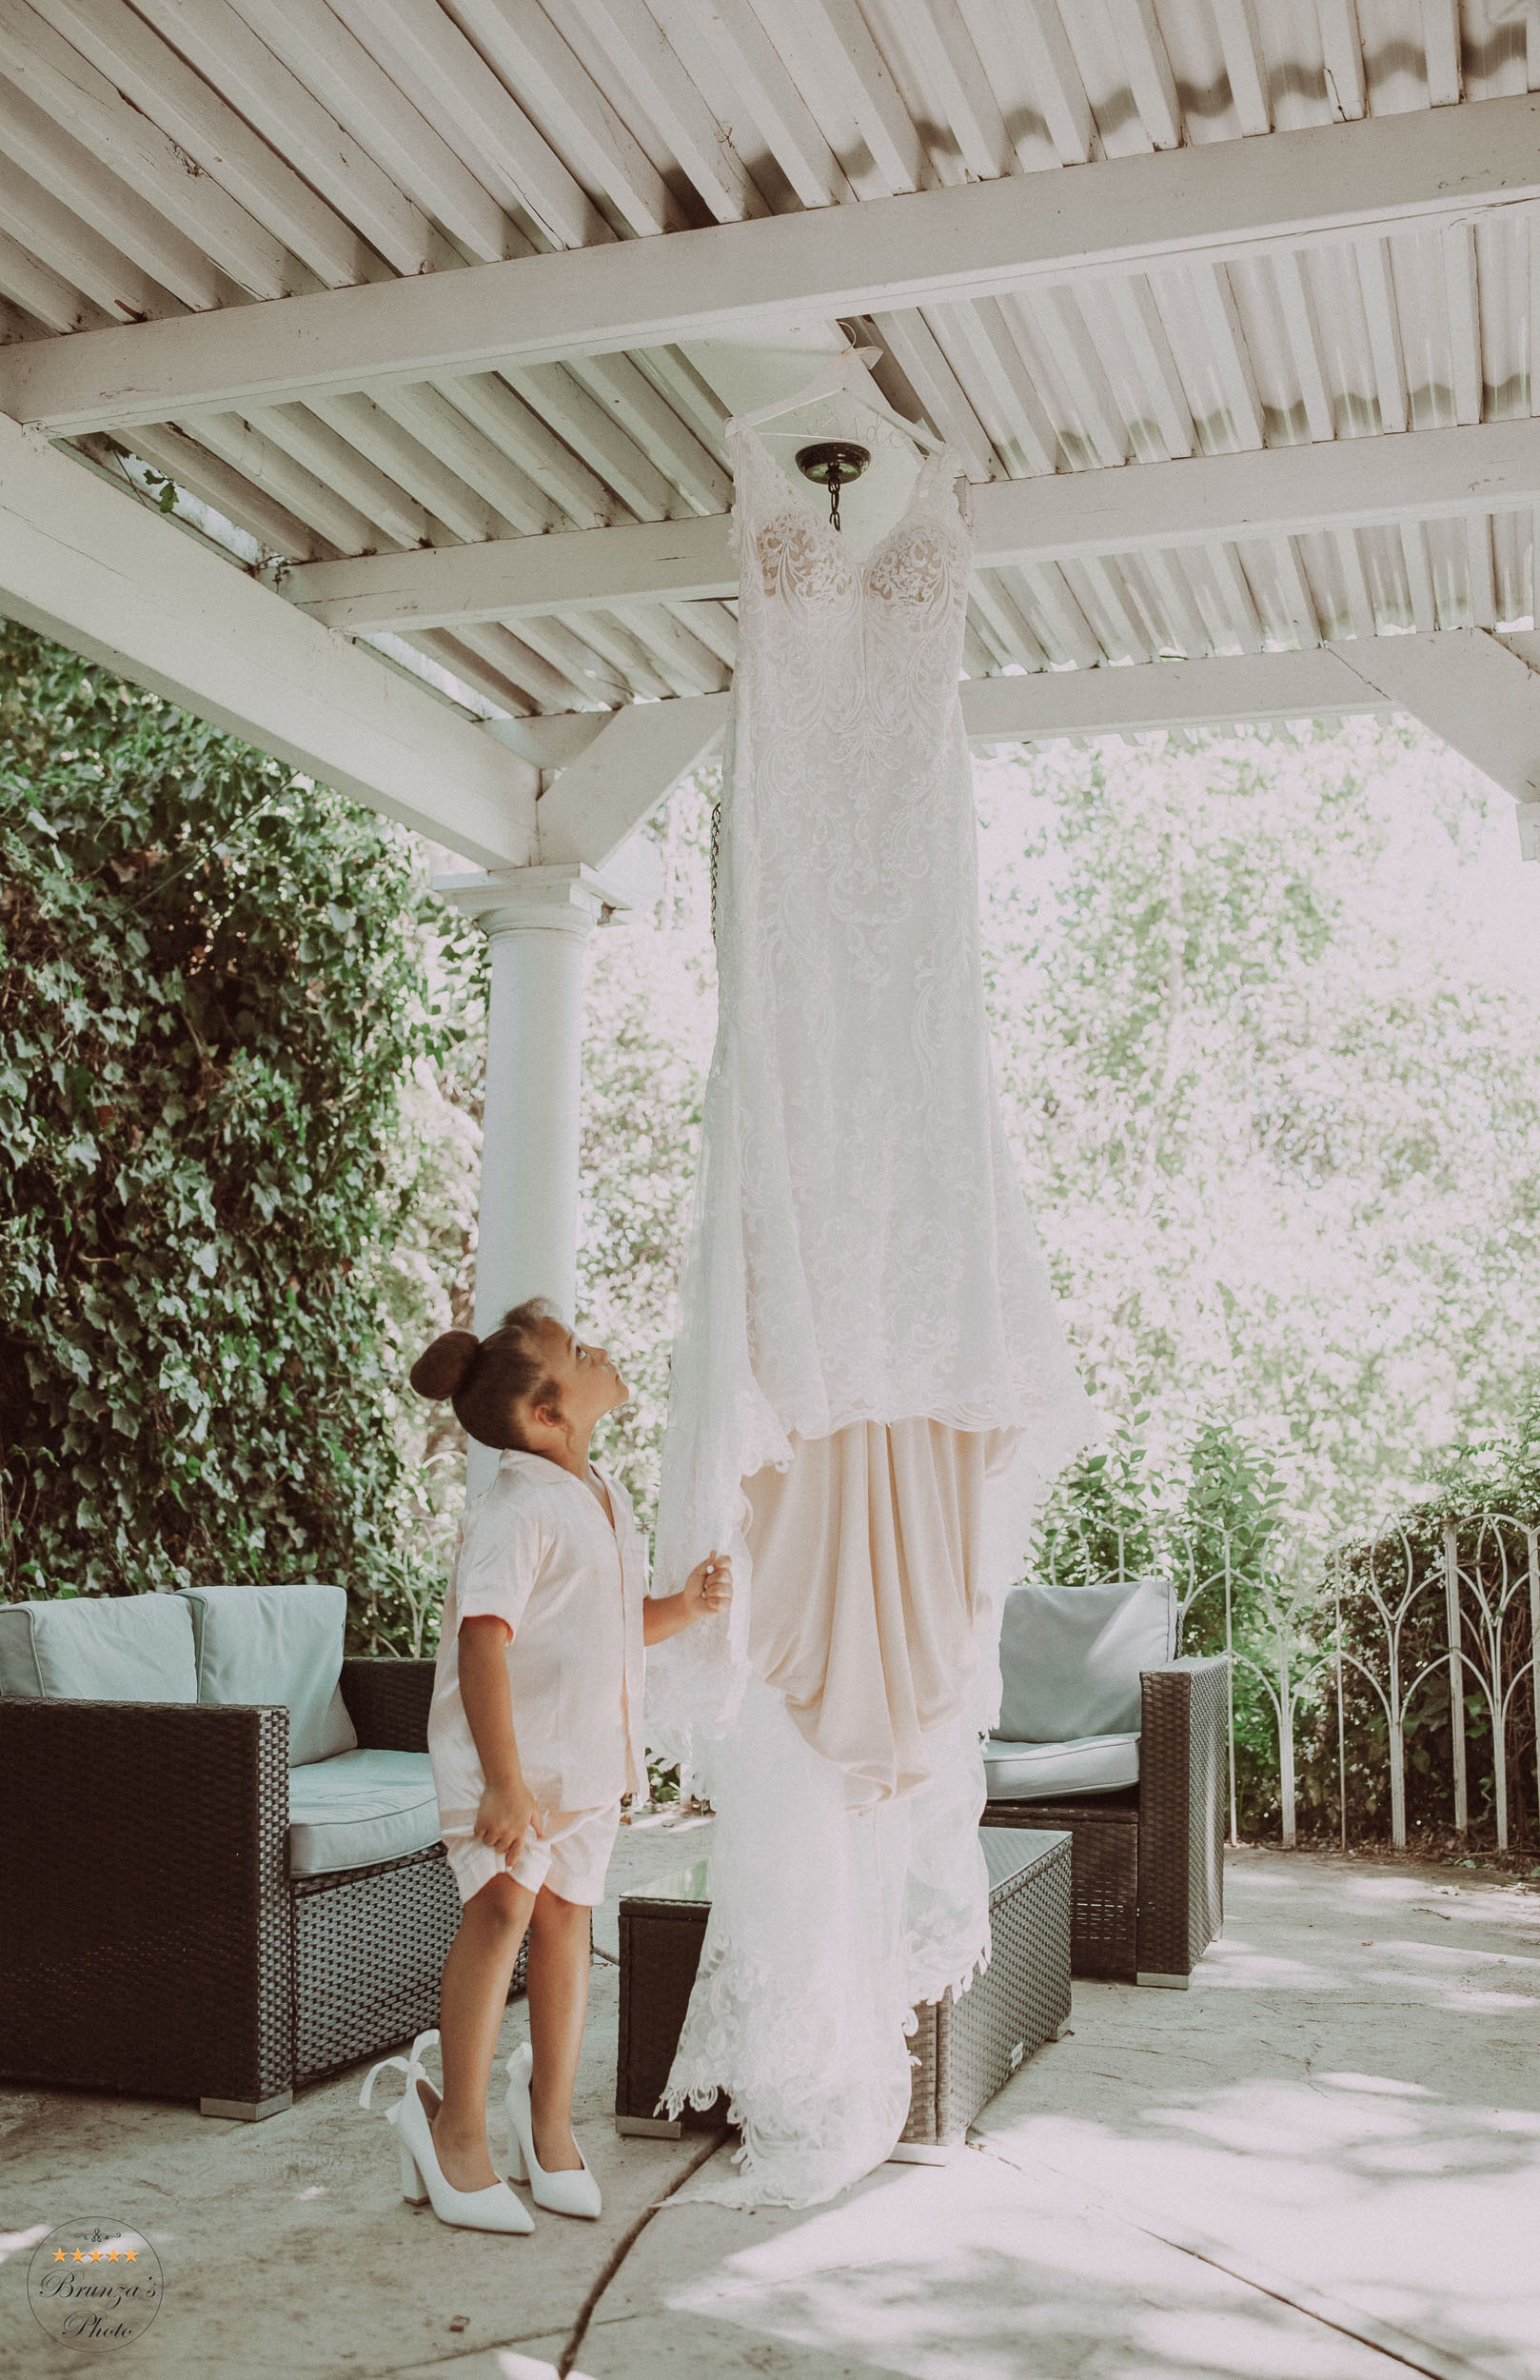 A little girl looking at a wedding dress hanging on a patio.